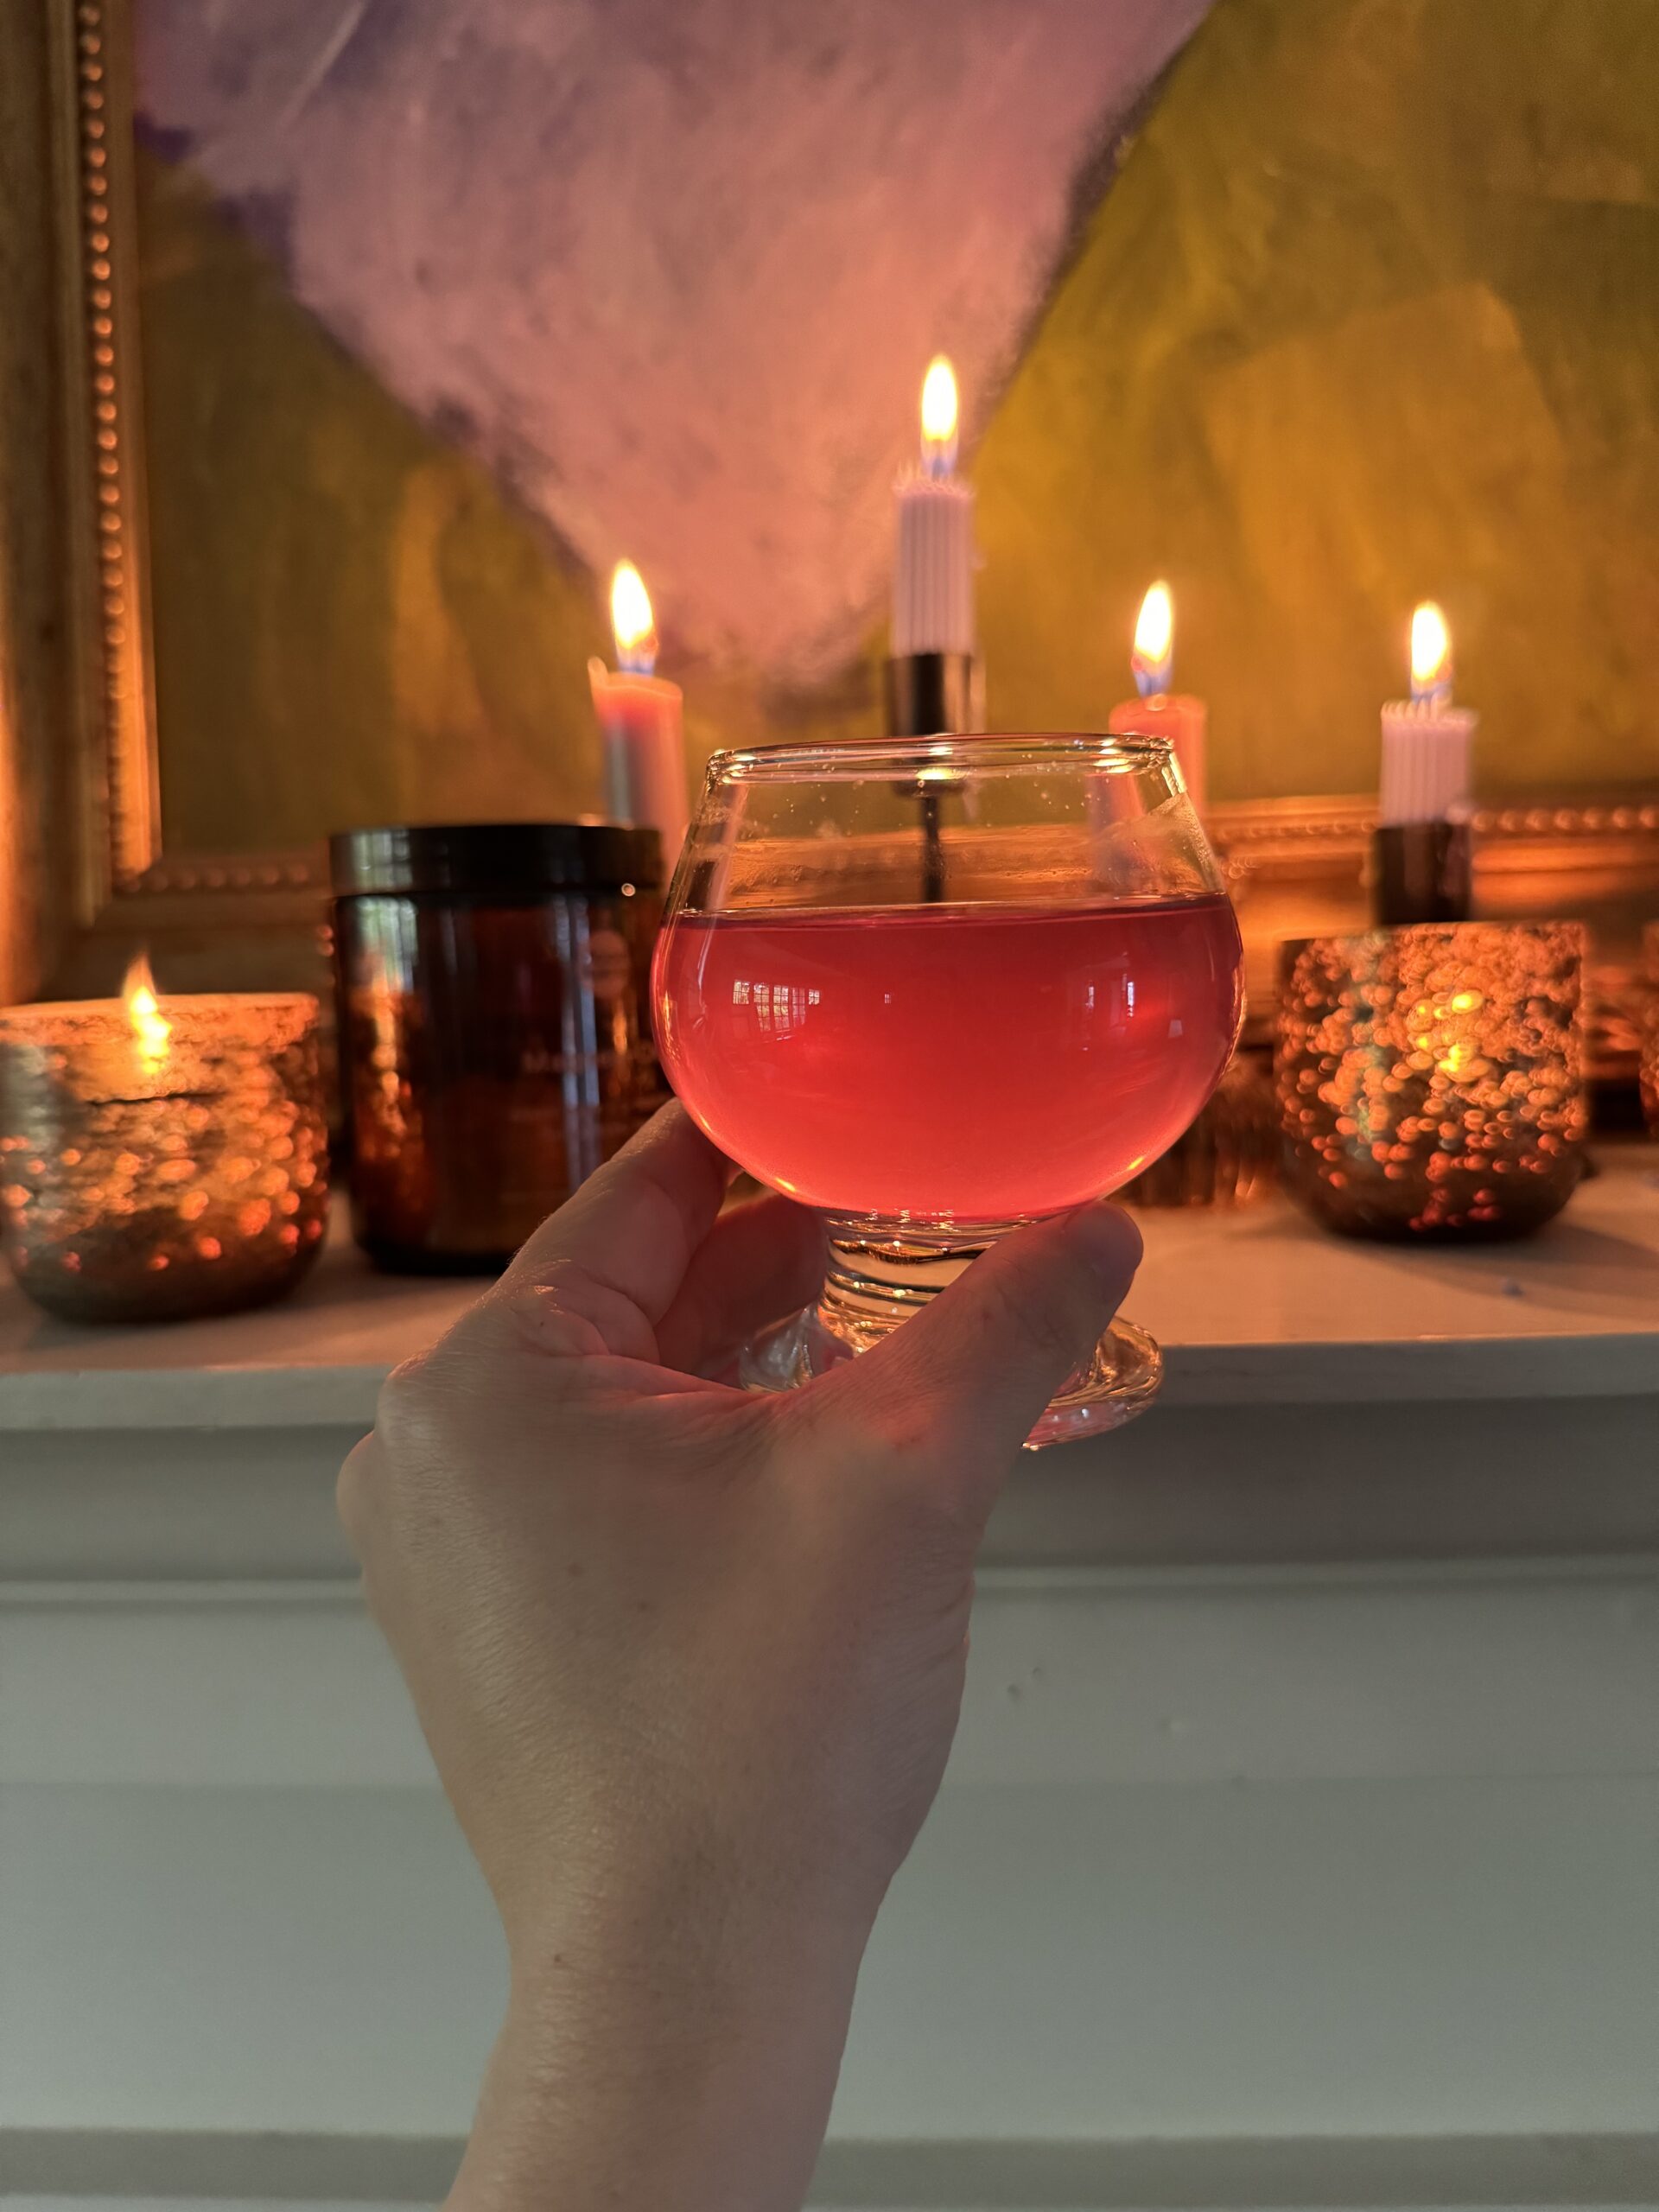 A hand holding a glass of red drink, with lit candles and decorative lights in the background, creating a warm ambiance.